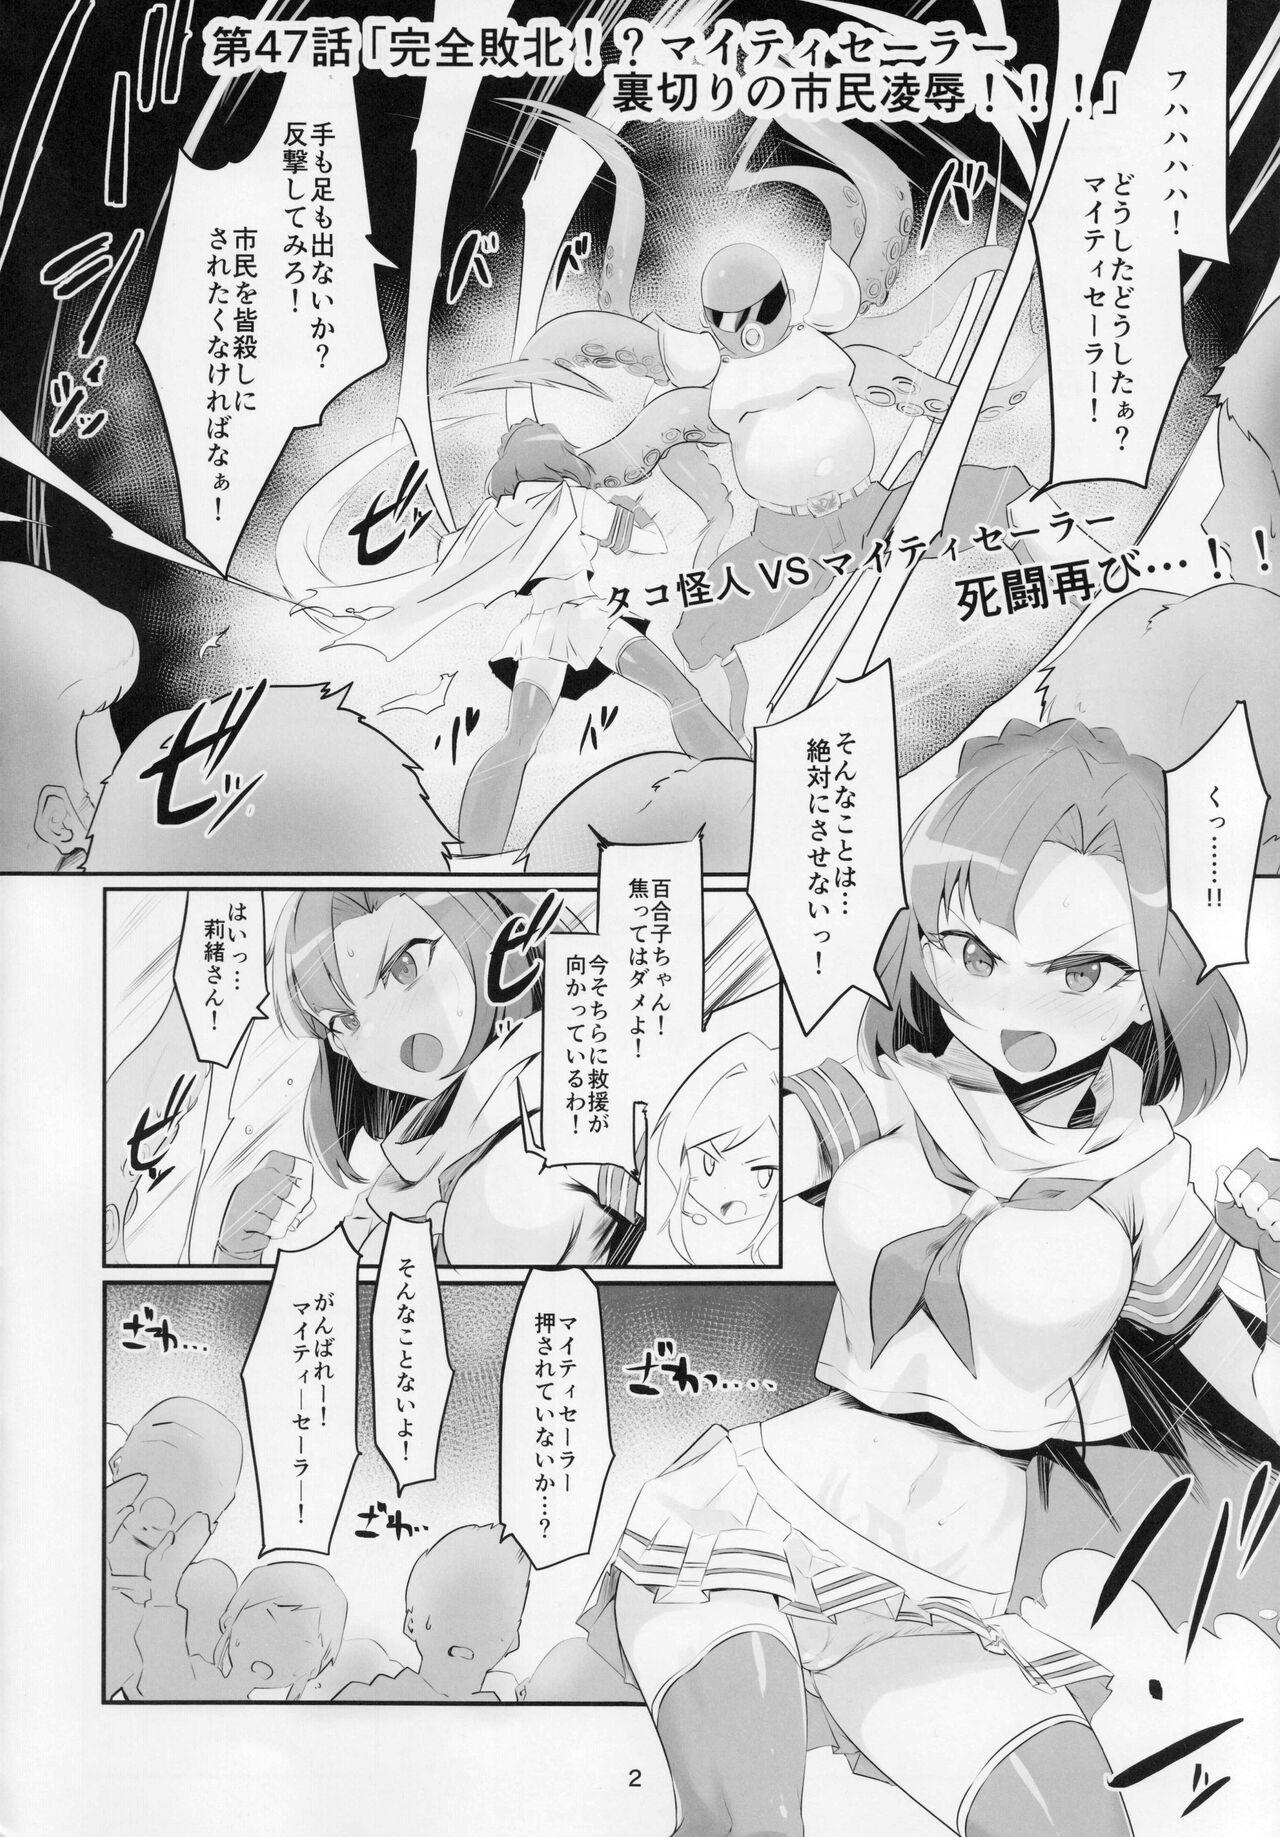 Audition Mighty Sailor Completely Defeated!? + Omake Episode - The idolmaster Marido - Page 3